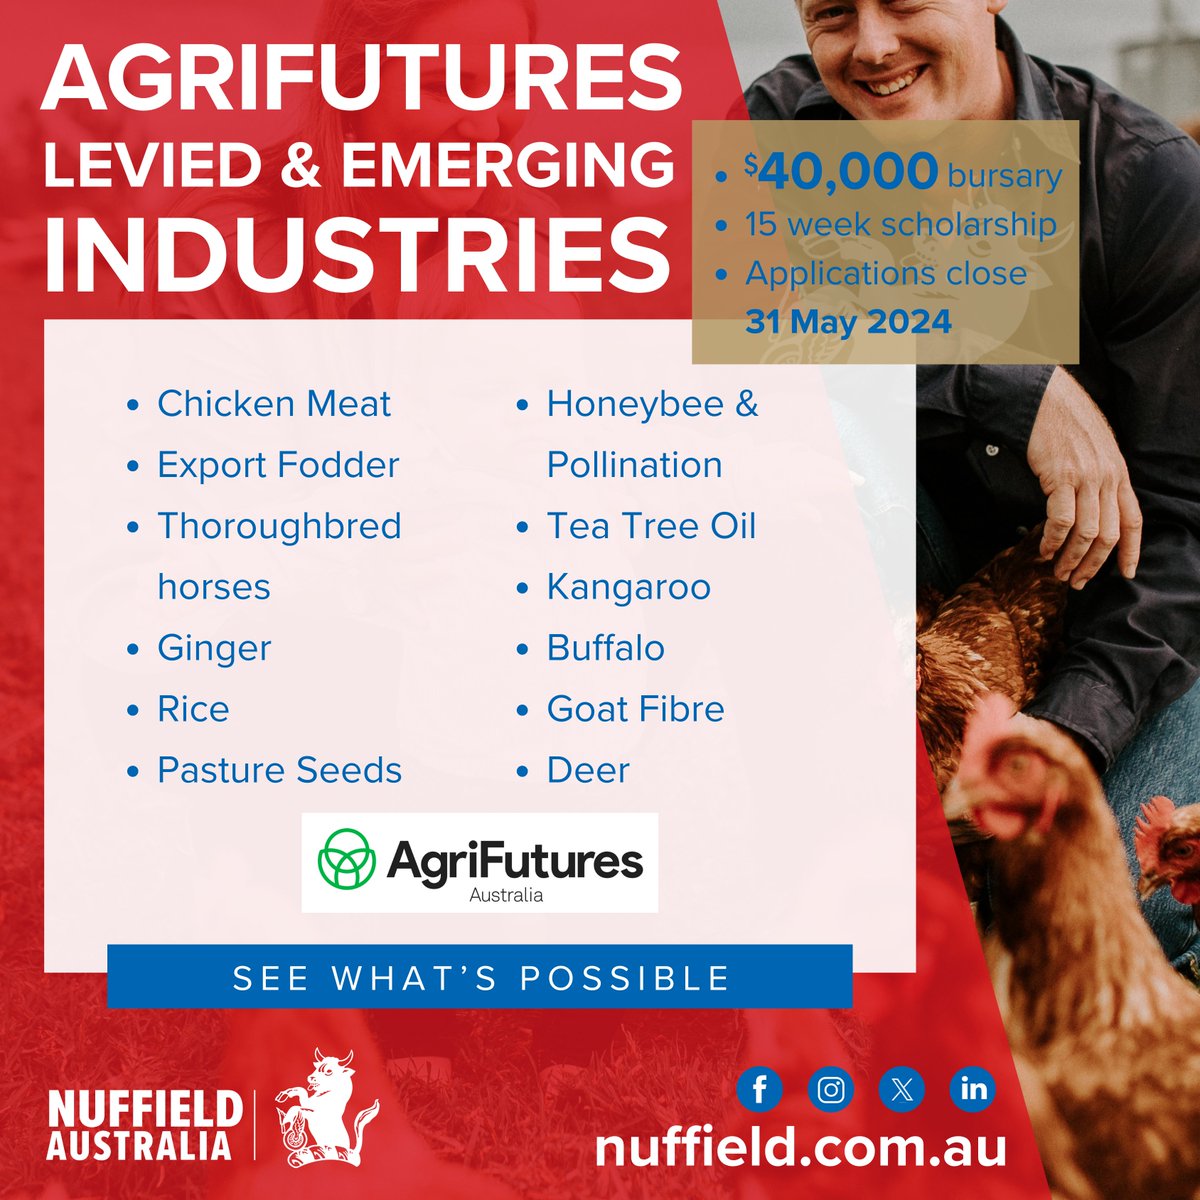 ARE YOU involved in a #agrifutures levied or emerging industry in Australia? If so you apply for a 2025 Nuffield Scholarship generously supported by @agrifutures nuffield.com.au #applynow #nuffield #chickenmeat #exportfodder #thoroughbred #ginger #rice #pastureseeds